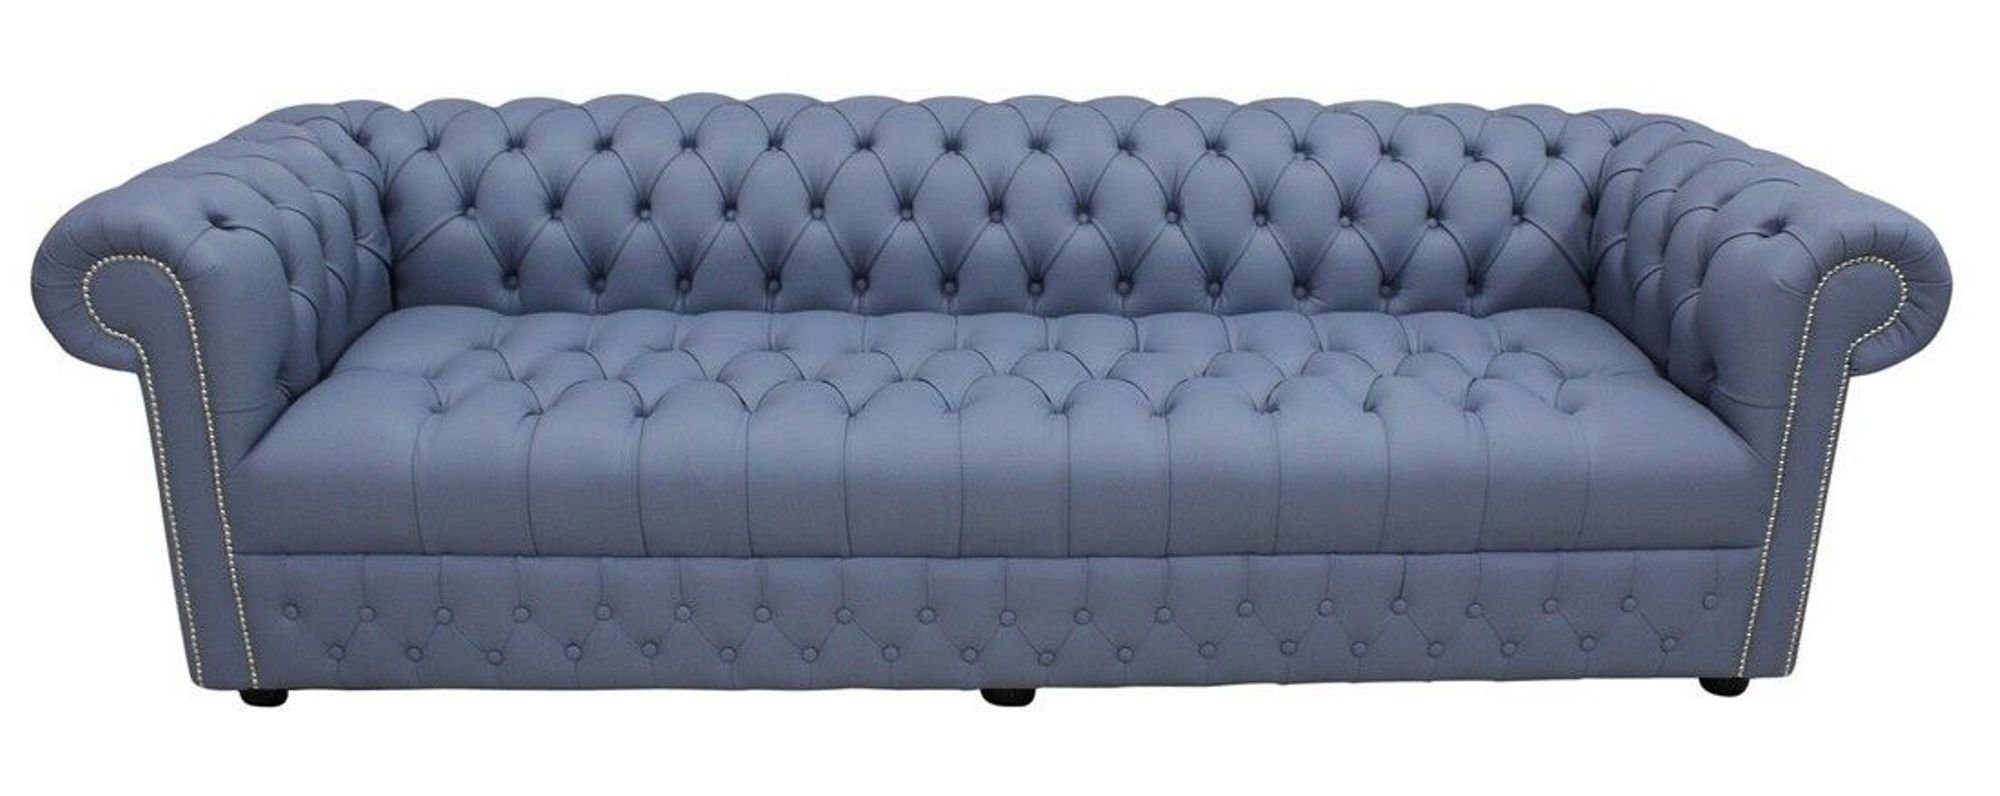 JVmoebel Chesterfield-Sofa XXL Big Sofa Couch Chesterfield 480cm Polster Sofas 3 Sitzer, Made in Europe